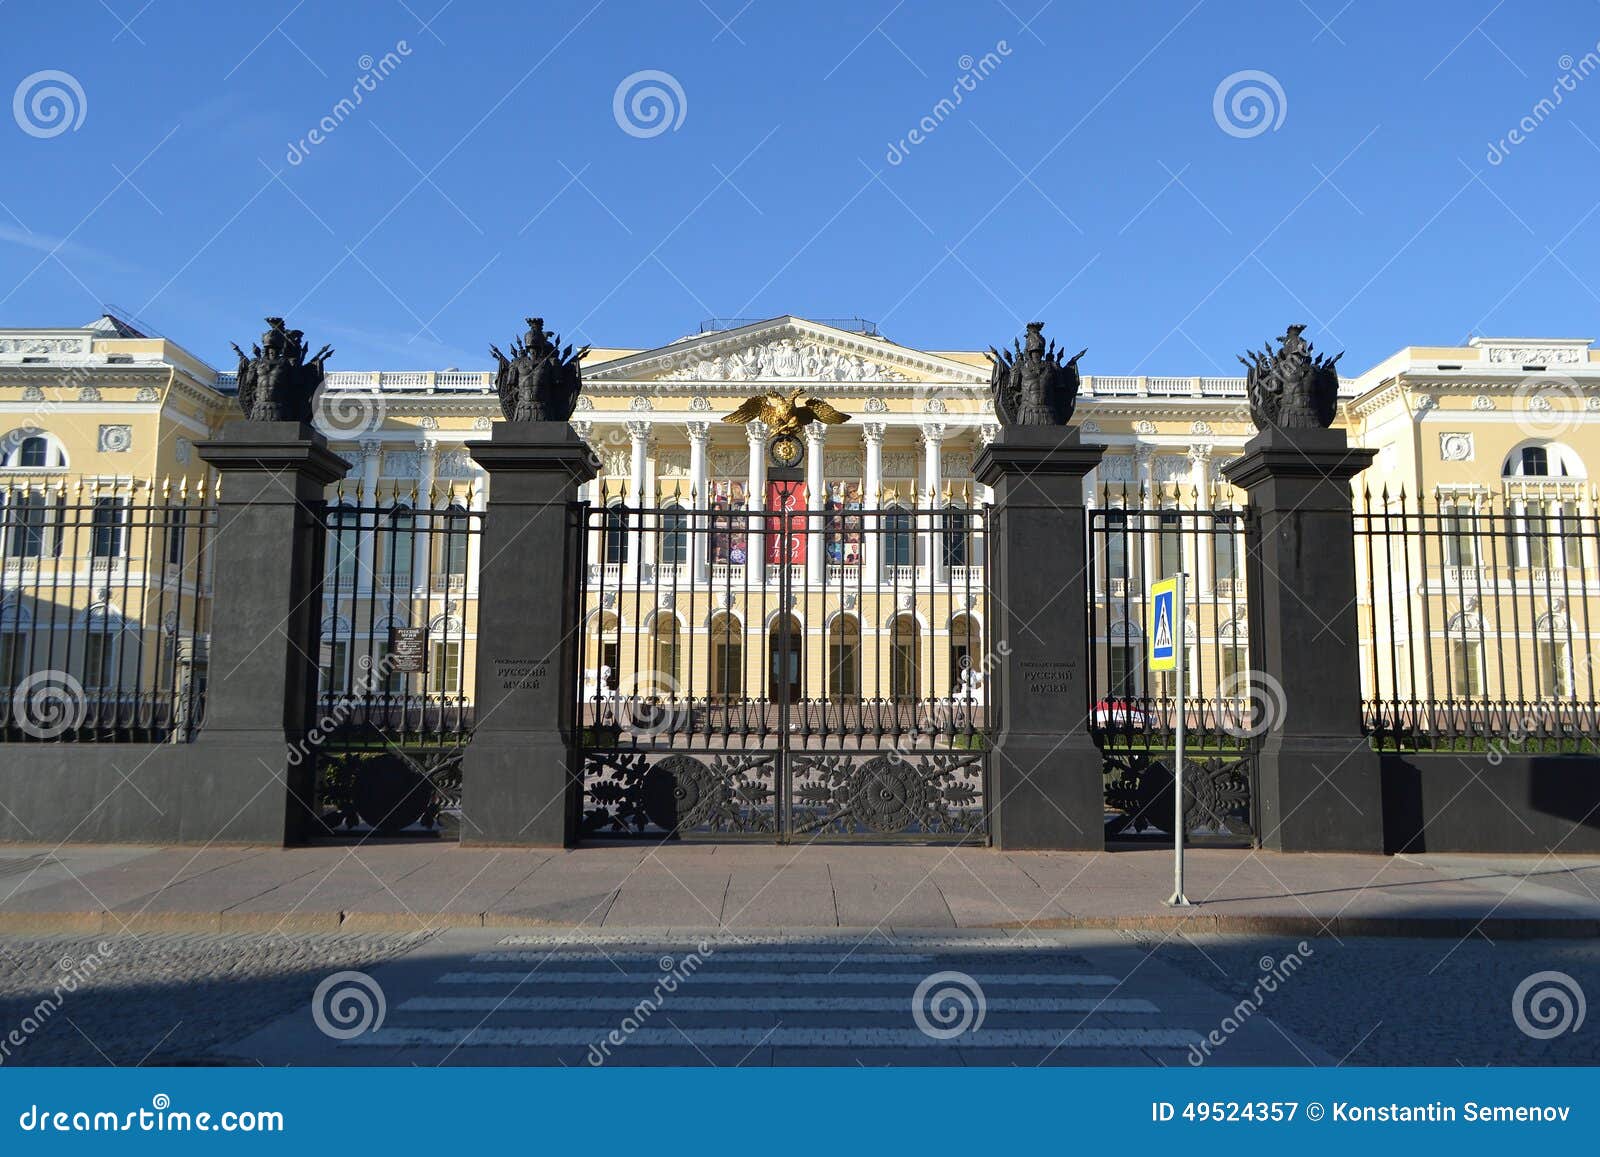 Russian Museum Design And 107